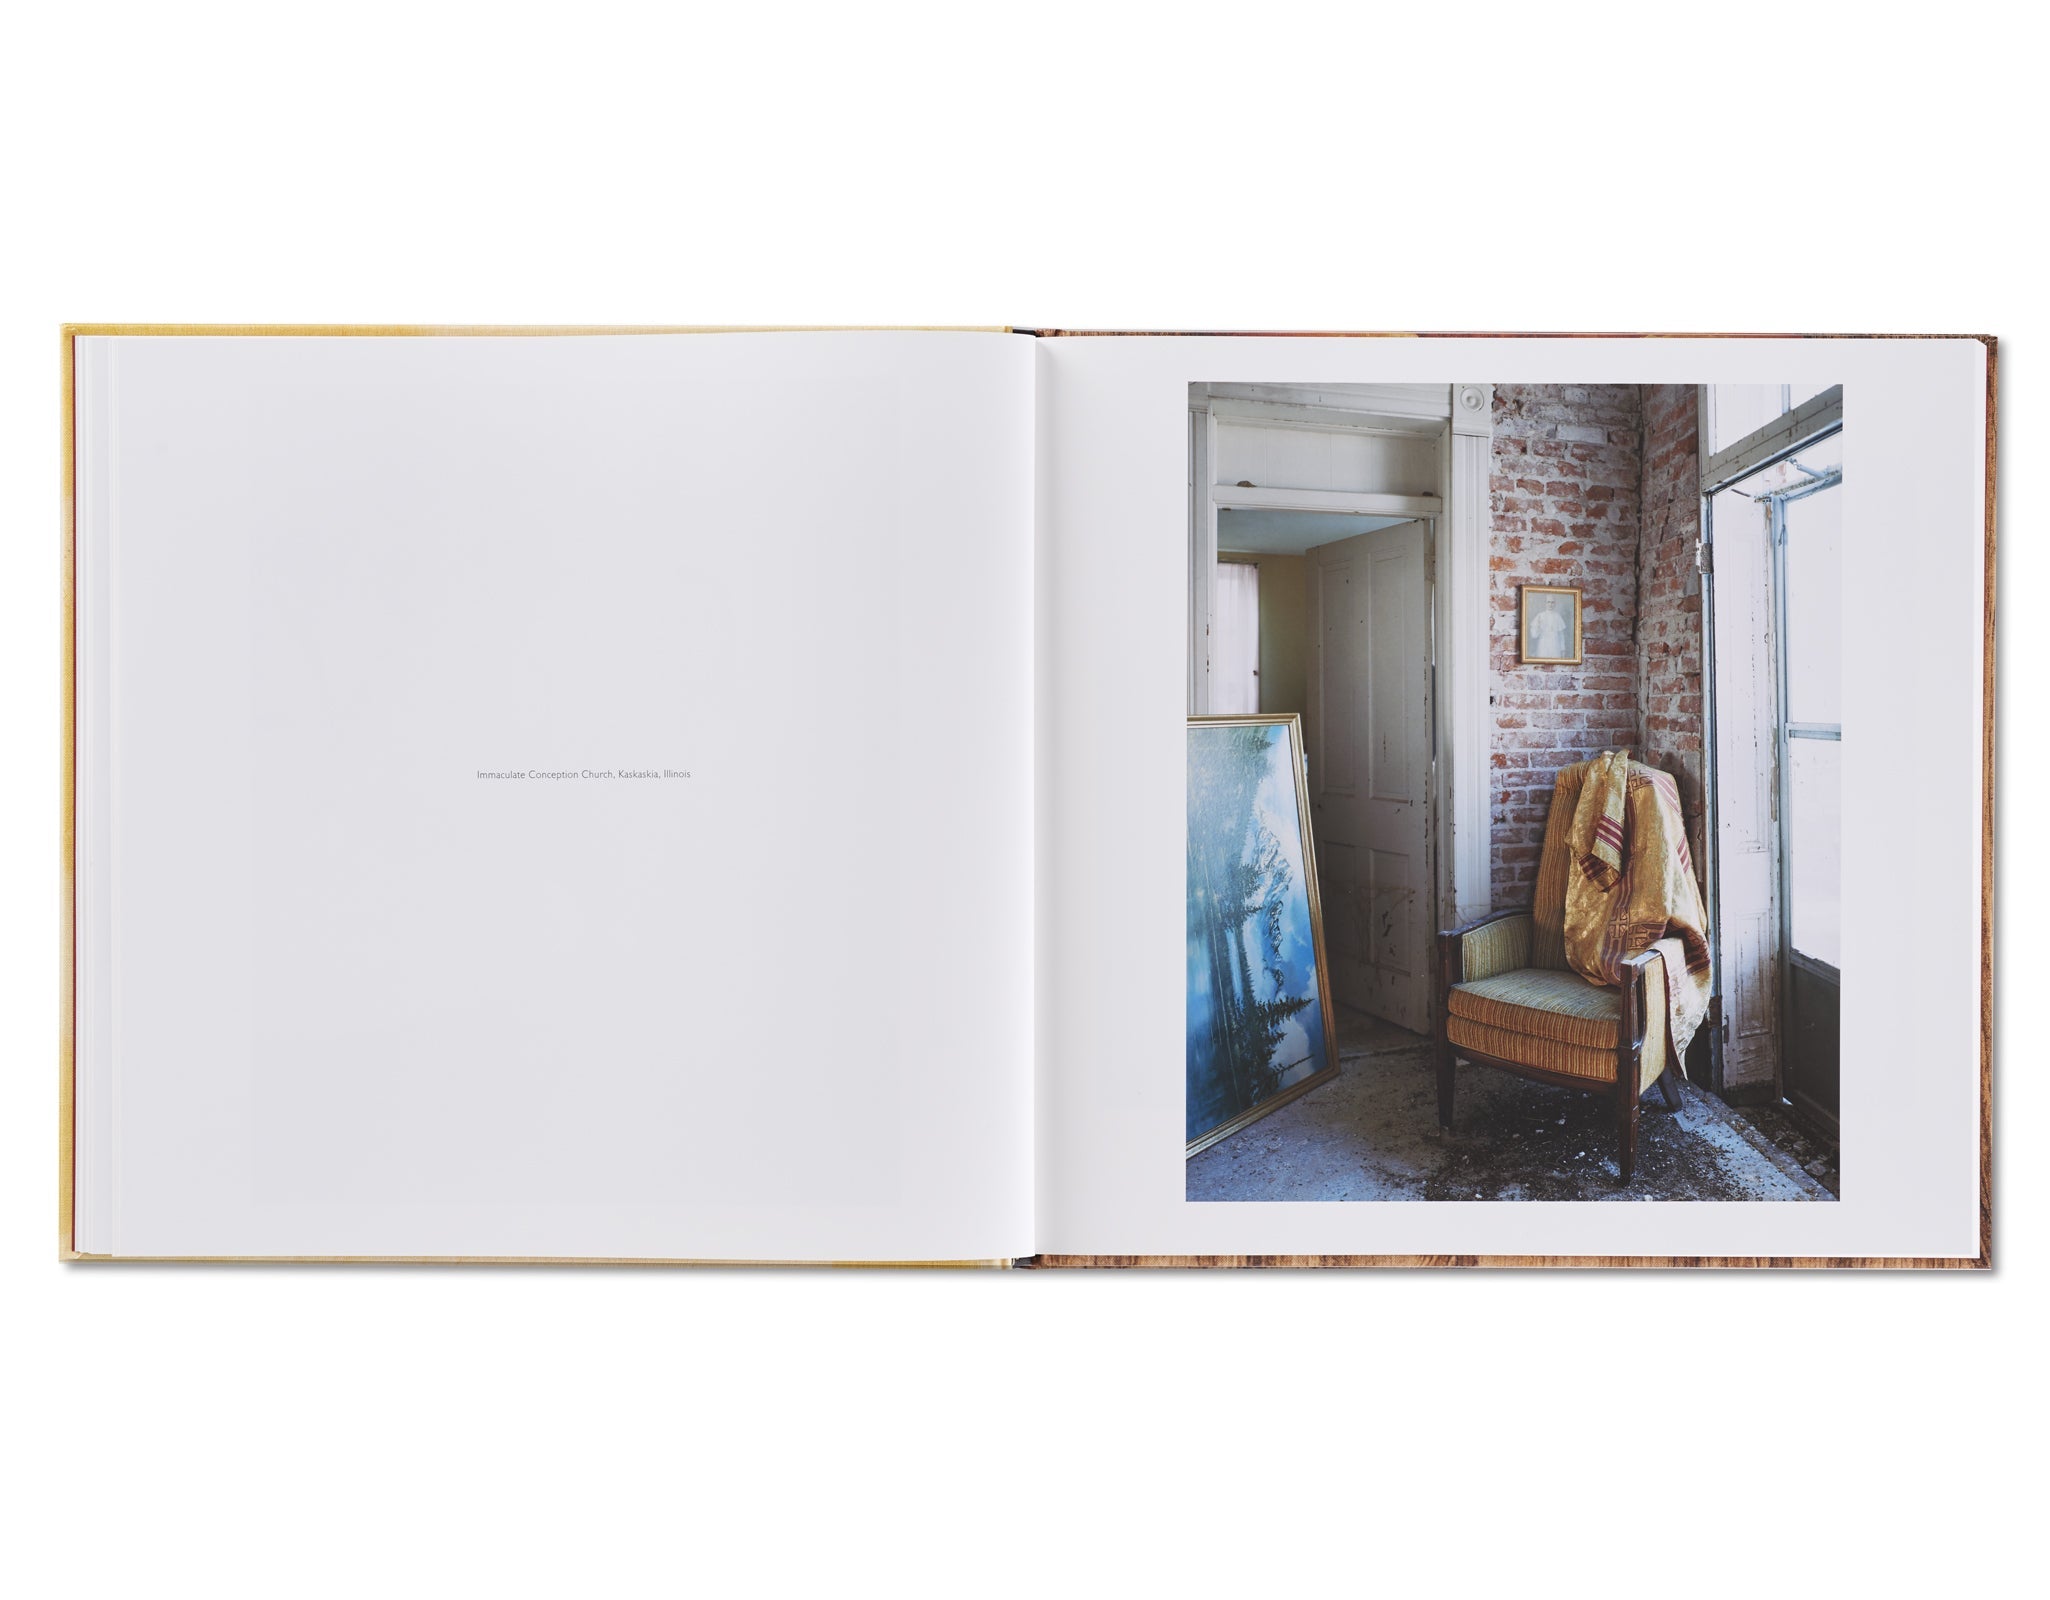 SLEEPING BY THE MISSISSIPPI by Alec Soth – twelvebooks